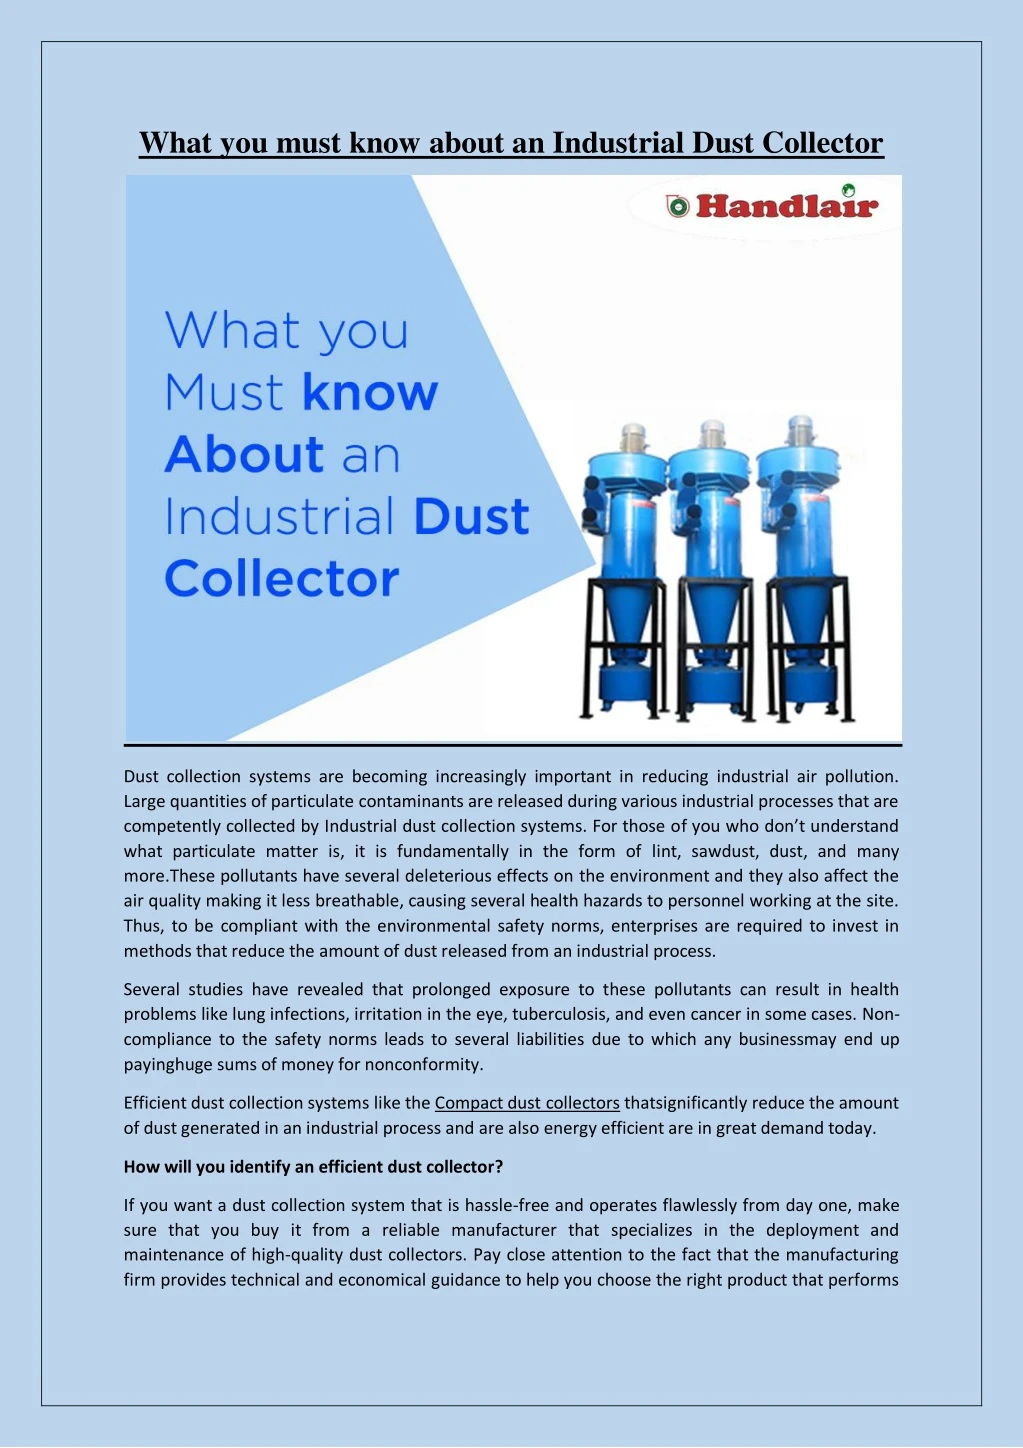 what you must know about an industrial dust